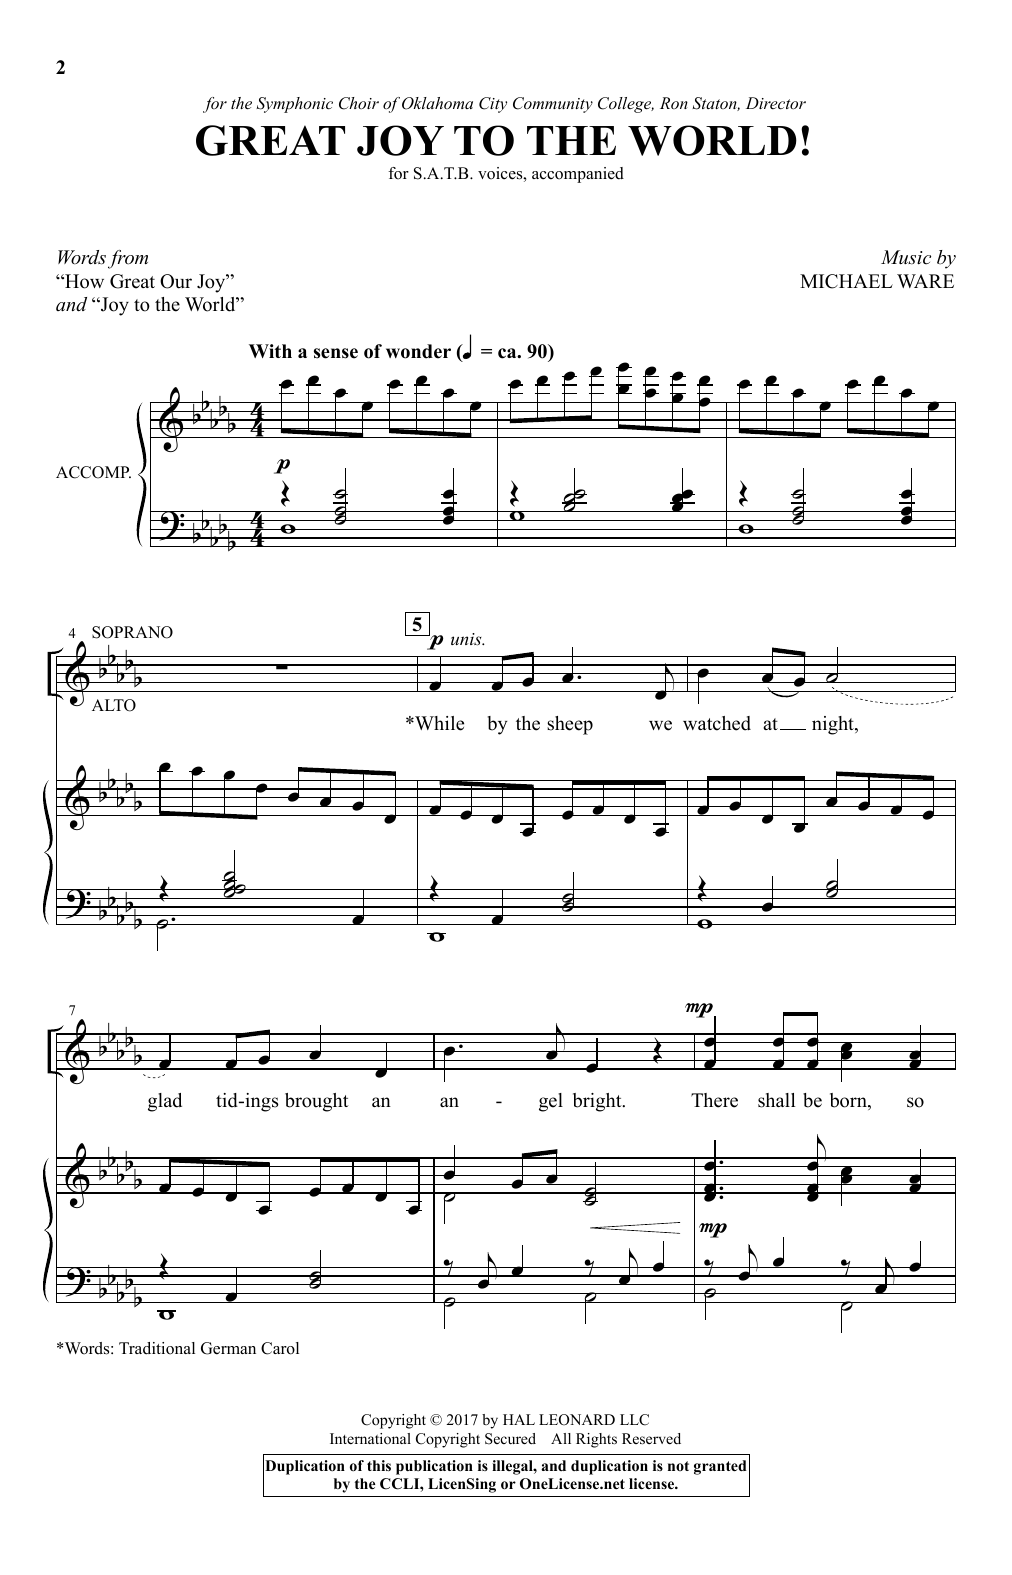 Download Michael Ware Great Joy To The World Sheet Music